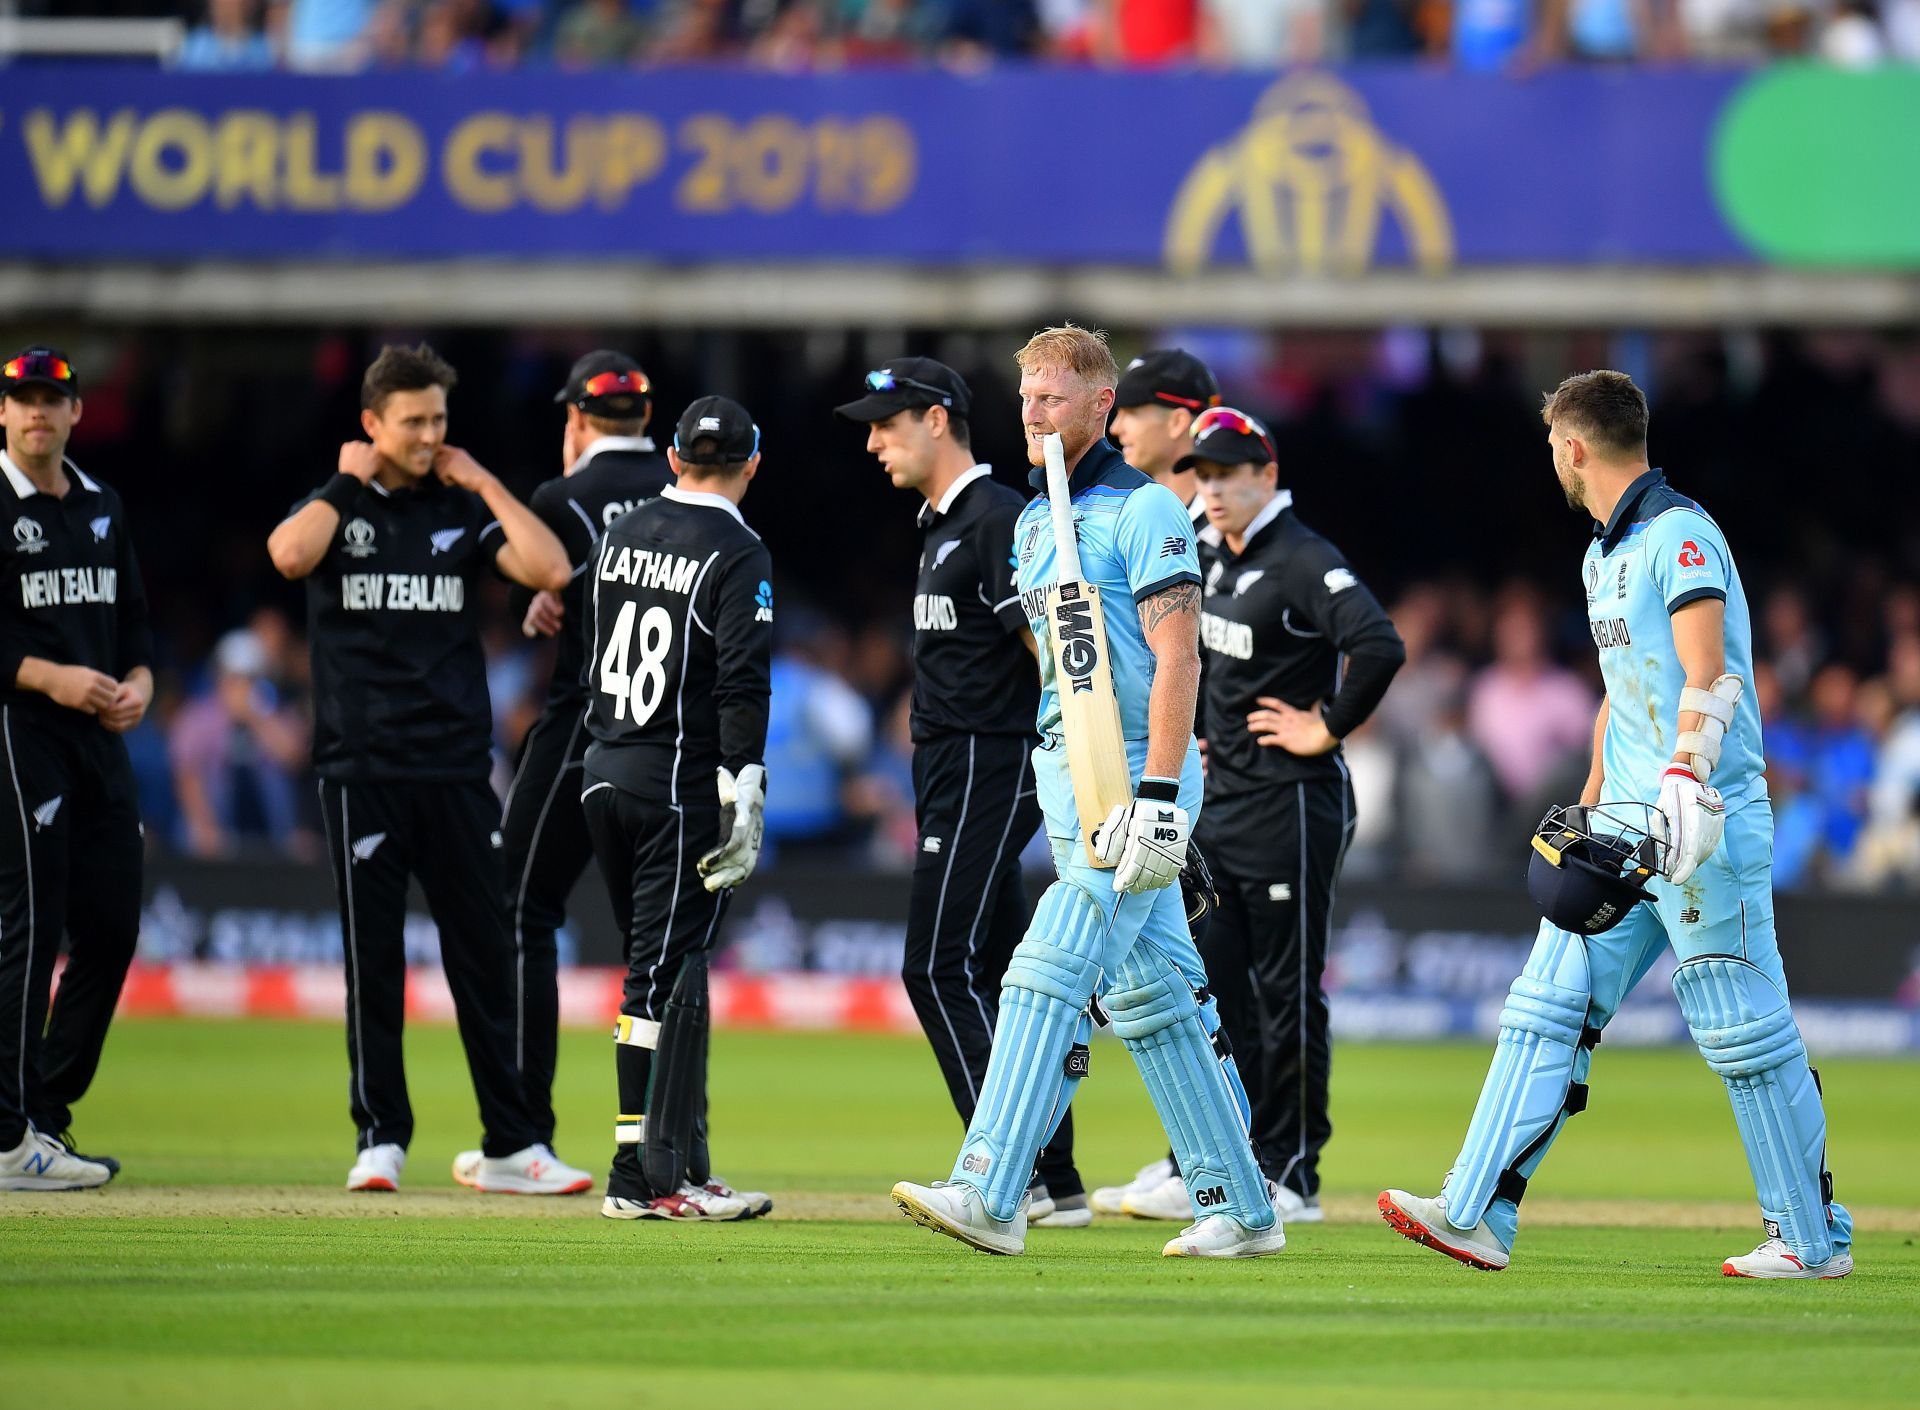 England and New Zealand players during the 2019 World Cup final. Pic: Getty Images